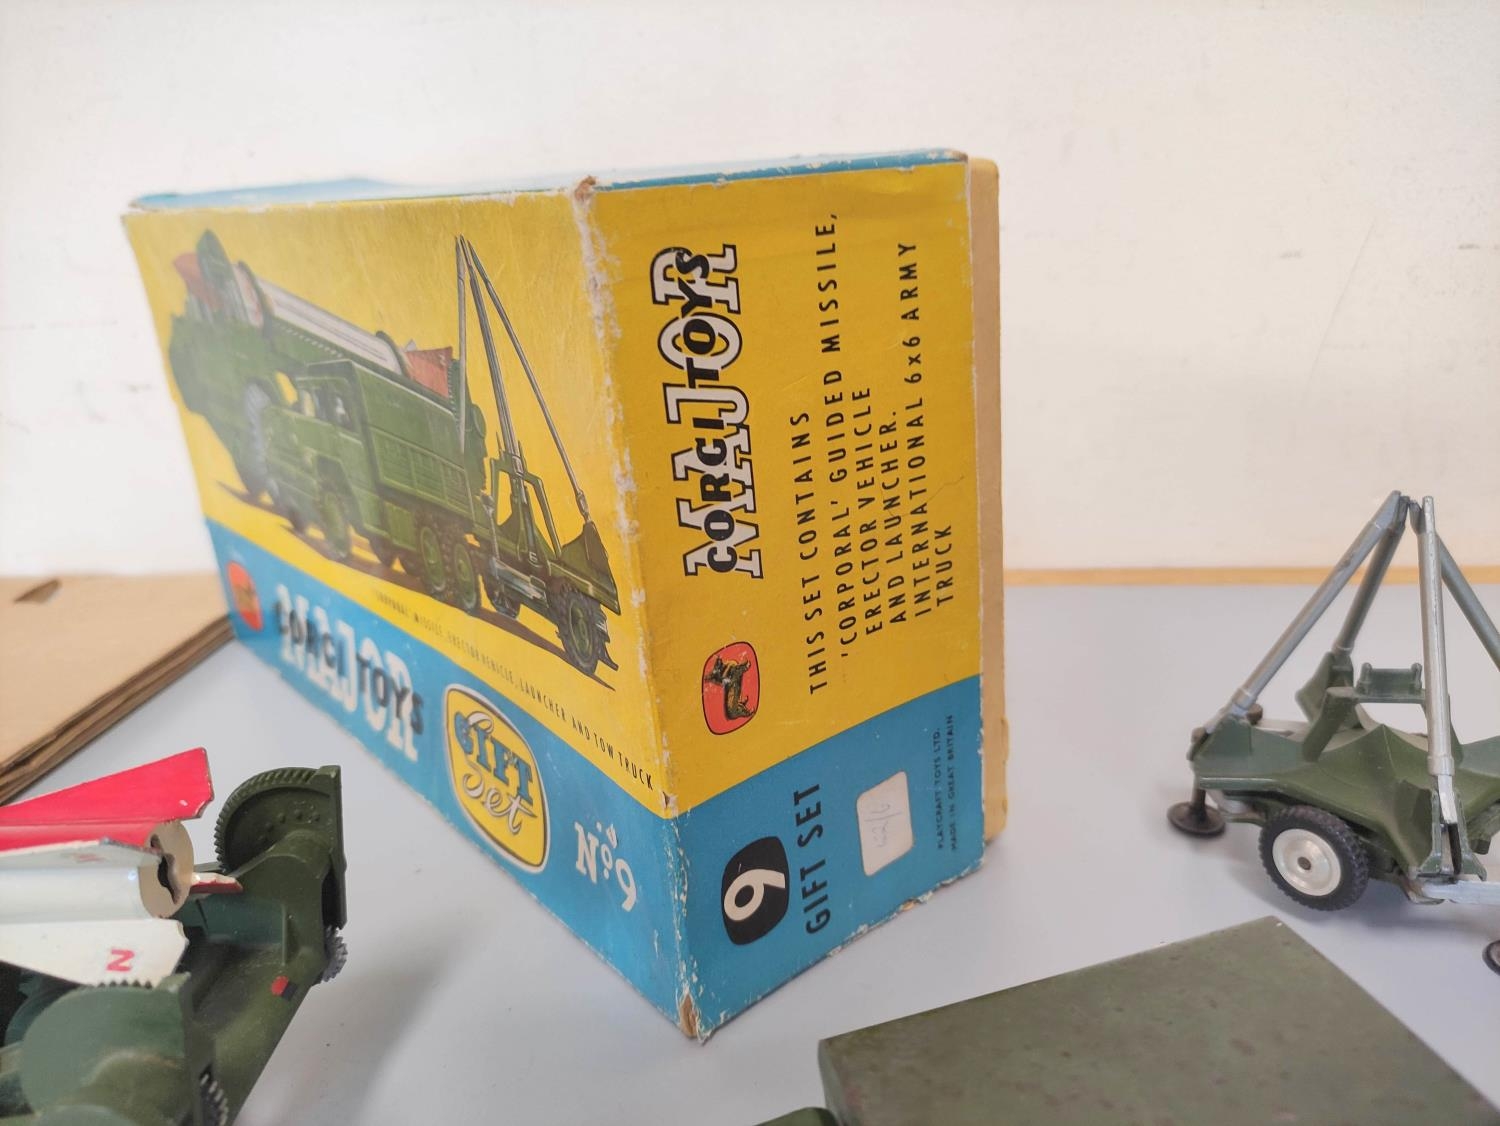 Corgi Toys. Major Gift Set No 9: 'Corporal' Missile, Erector Vehicle, Launcher and Town Truck. Boxed - Image 4 of 6